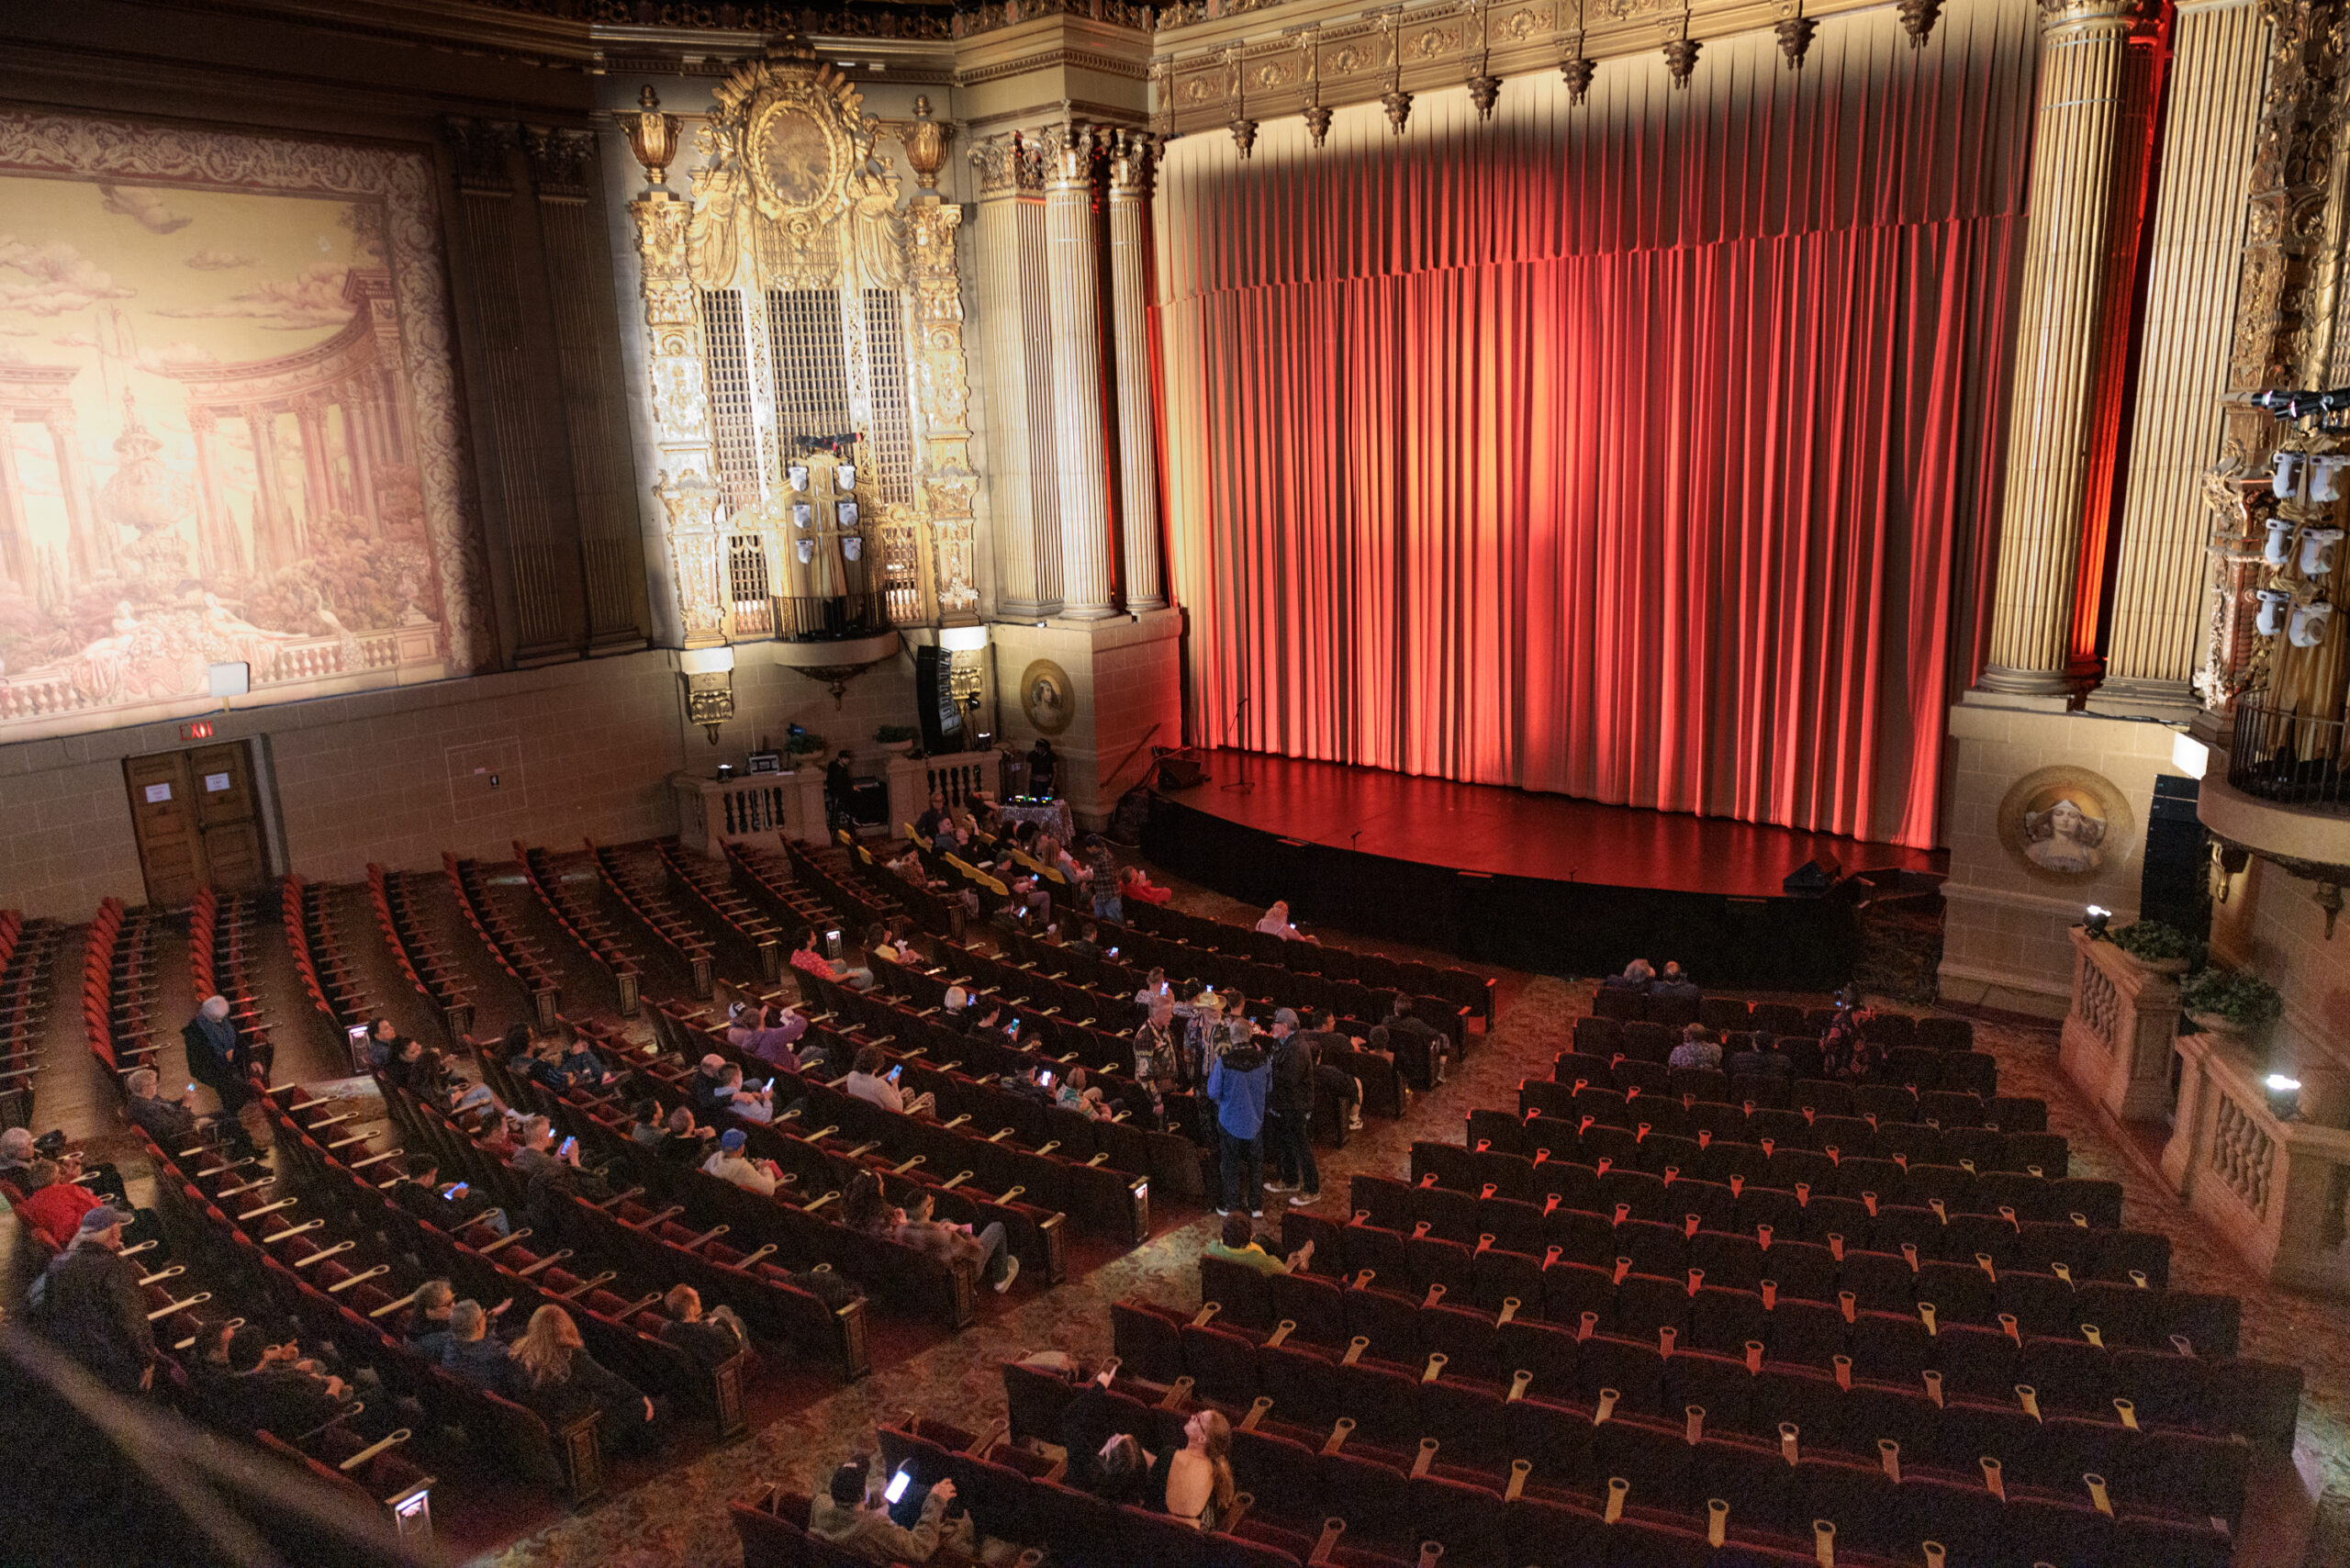 Why does everyone care so much about seats? Castro Theatre controversy explained